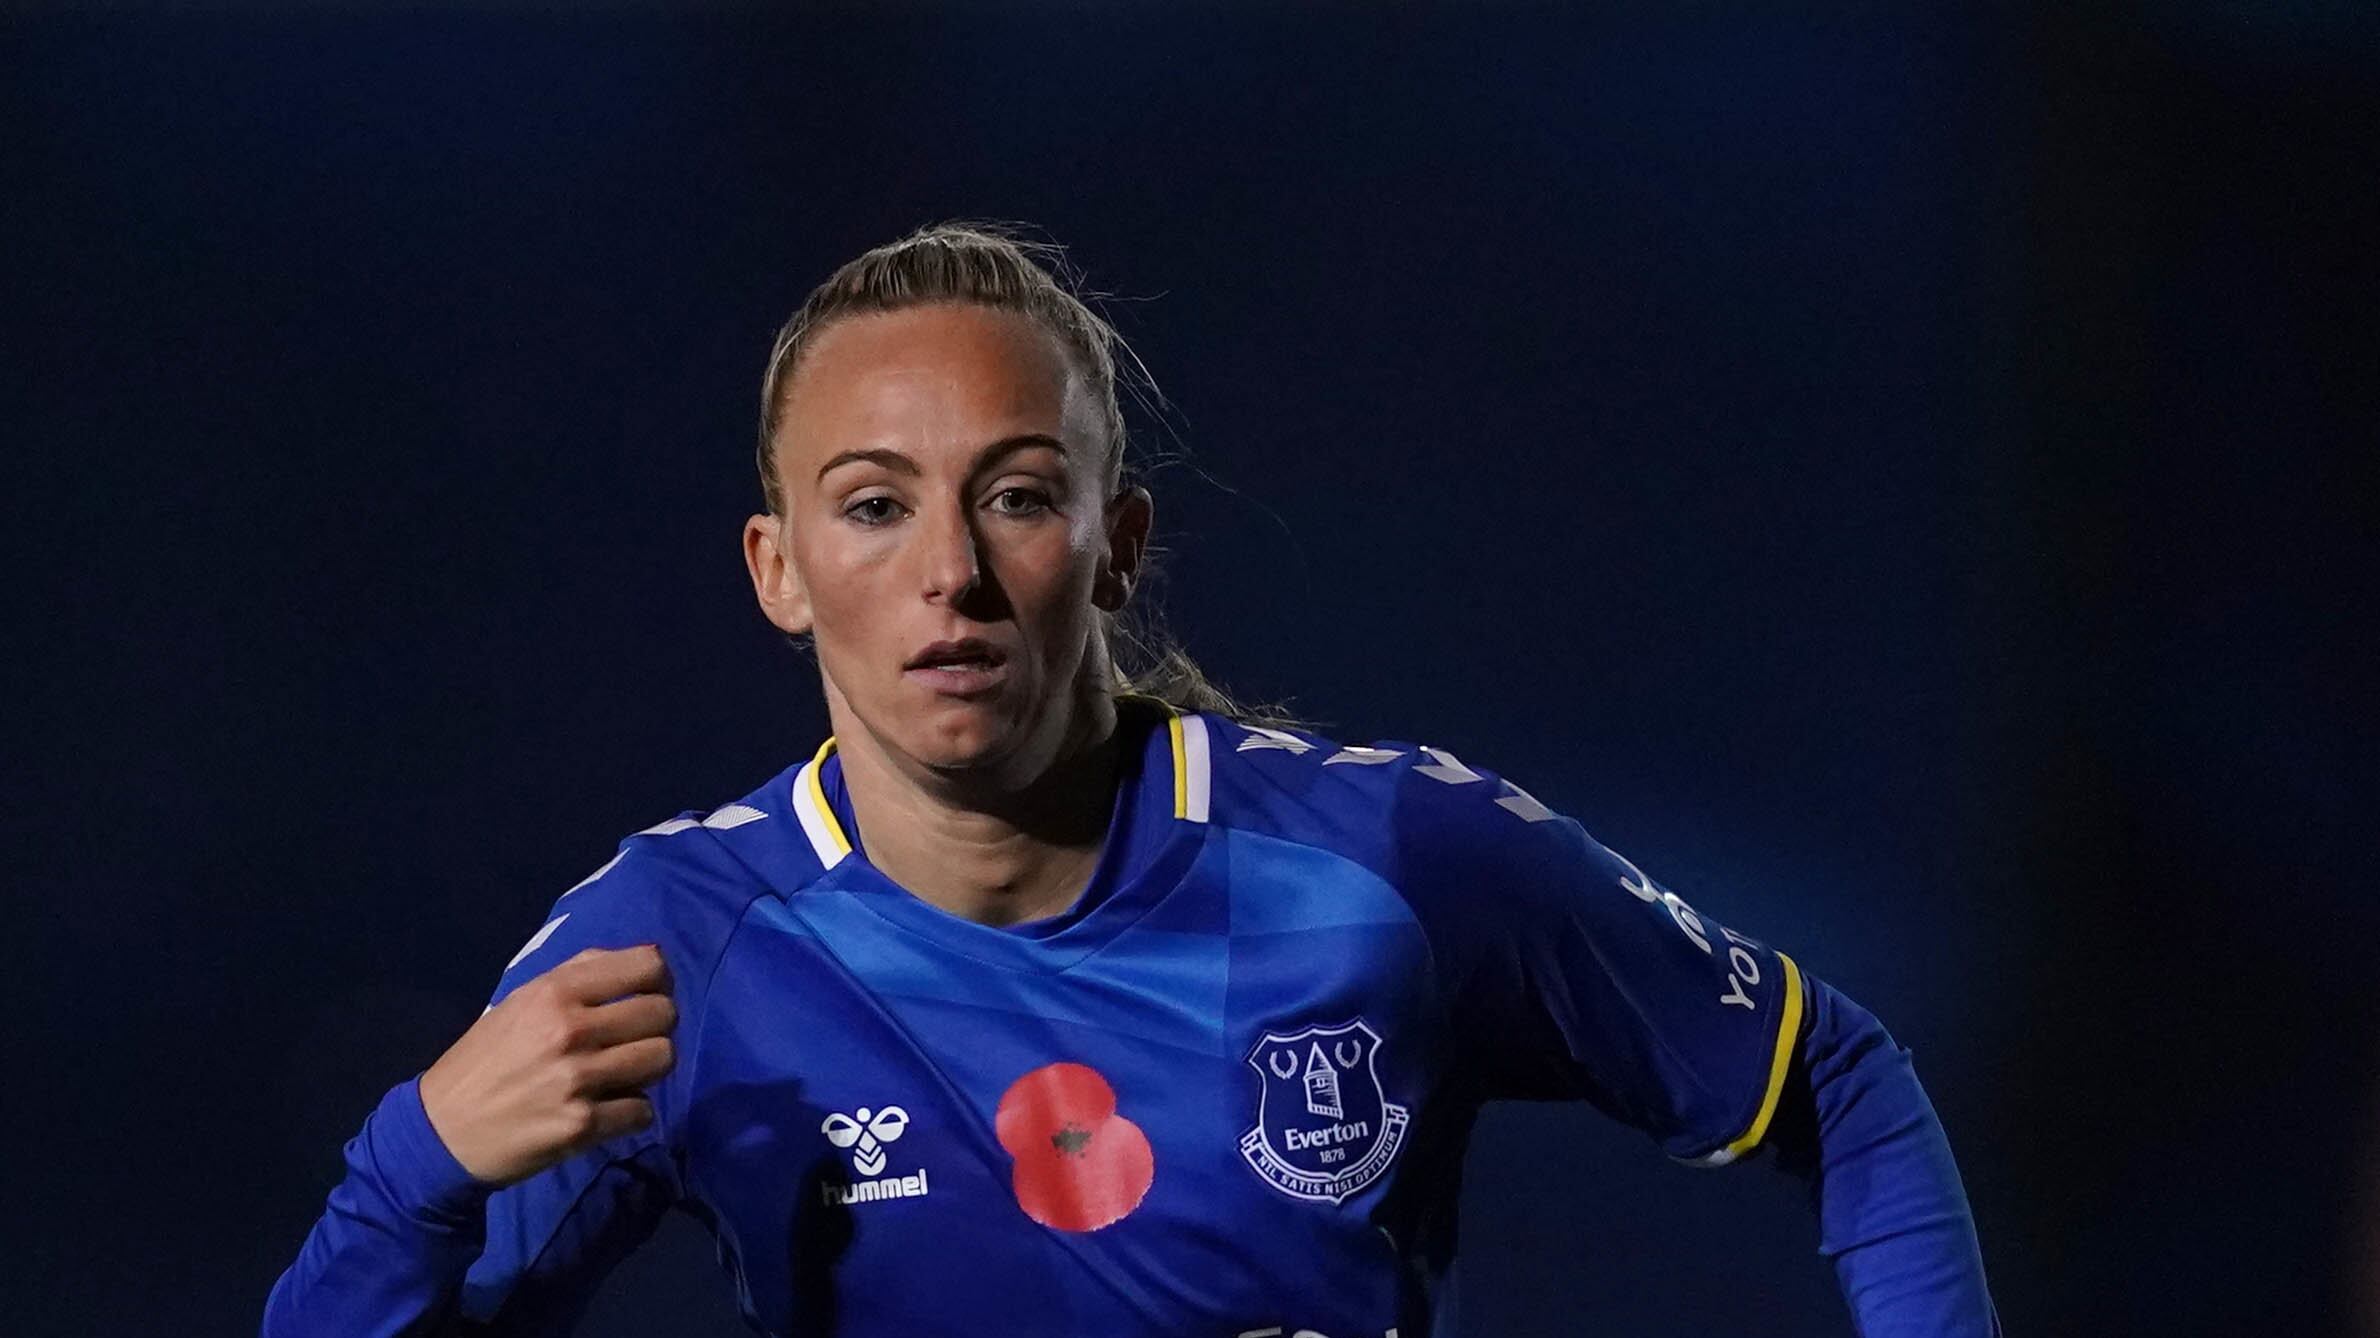 Toni Duggan will leave Everton when her contract expires at the end of the month